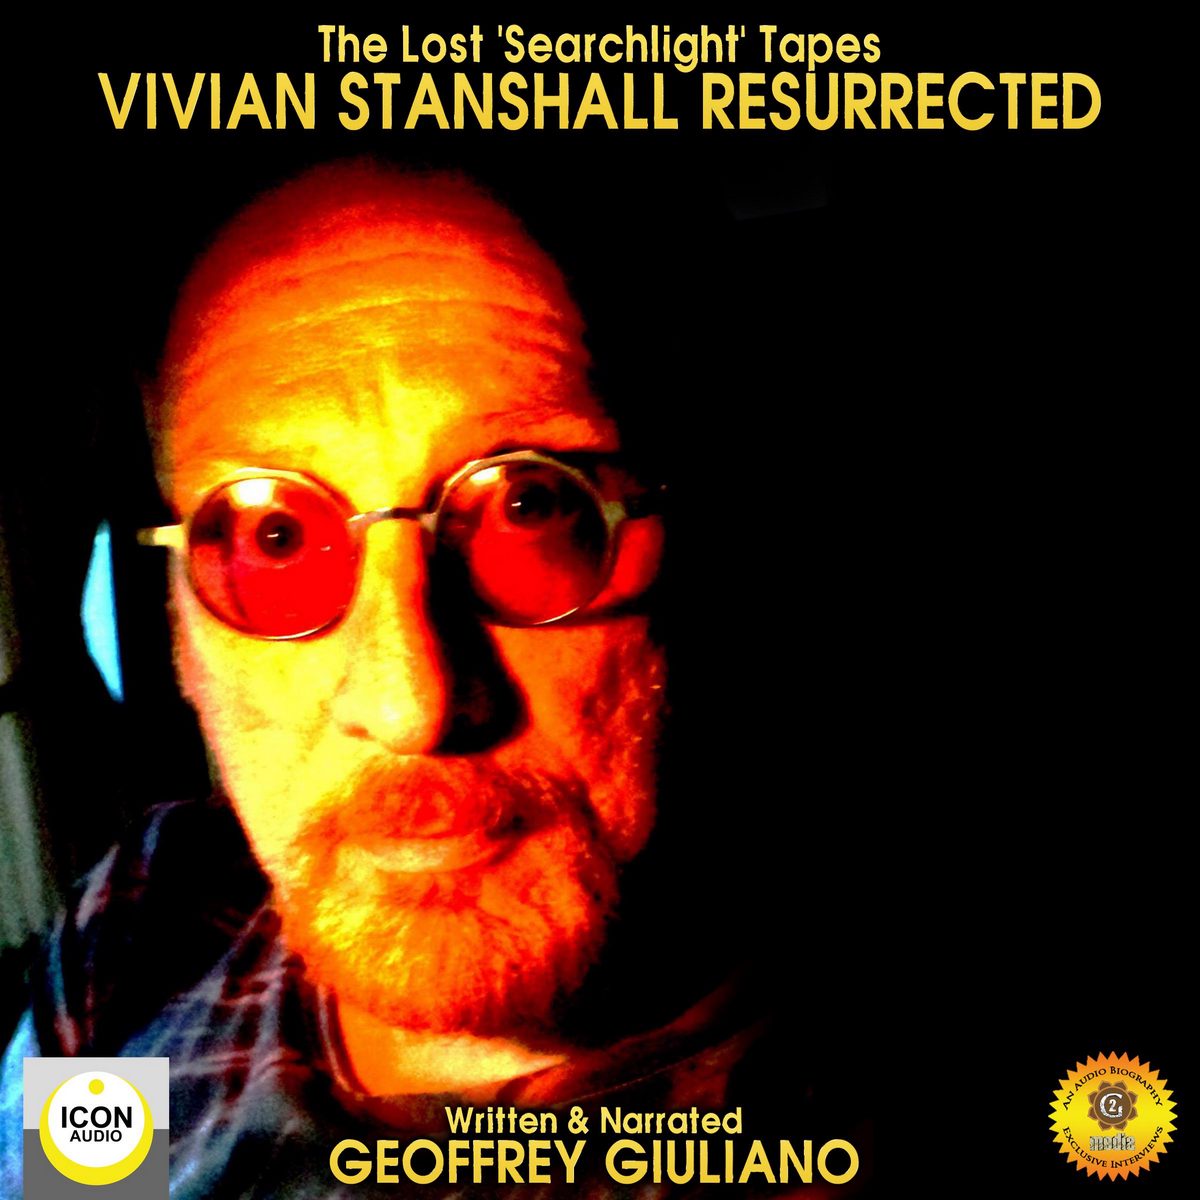 The Lost Searchlight Tapes Vivian Stanshall Resurrected